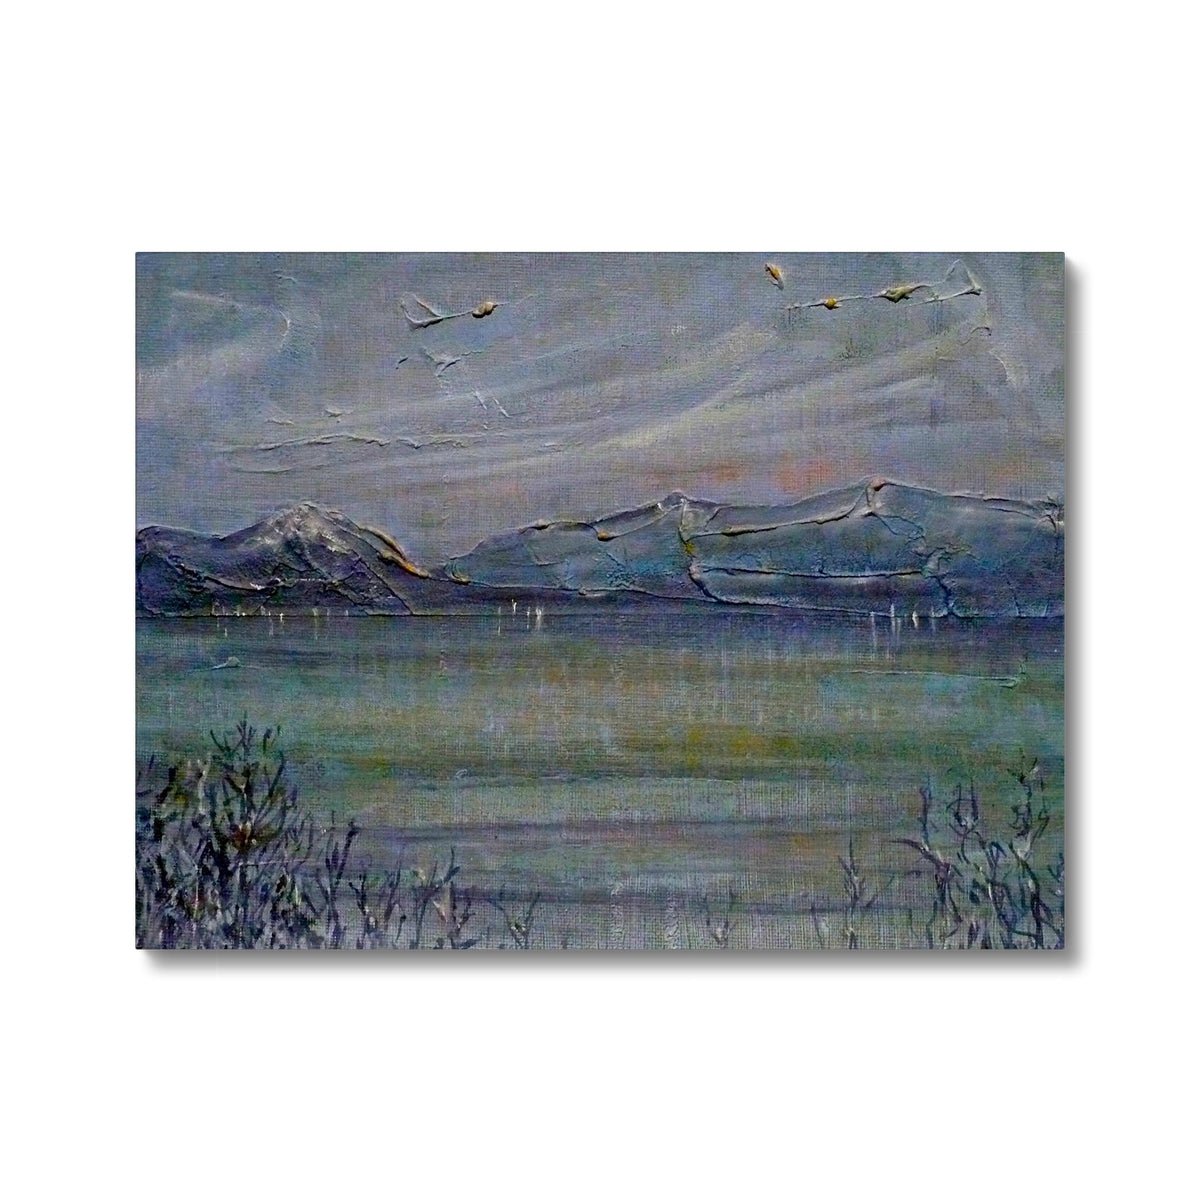 Loch Morlich Moonlight Painting | Canvas From Scotland-Contemporary Stretched Canvas Prints-Scottish Lochs & Mountains Art Gallery-24"x18"-Paintings, Prints, Homeware, Art Gifts From Scotland By Scottish Artist Kevin Hunter